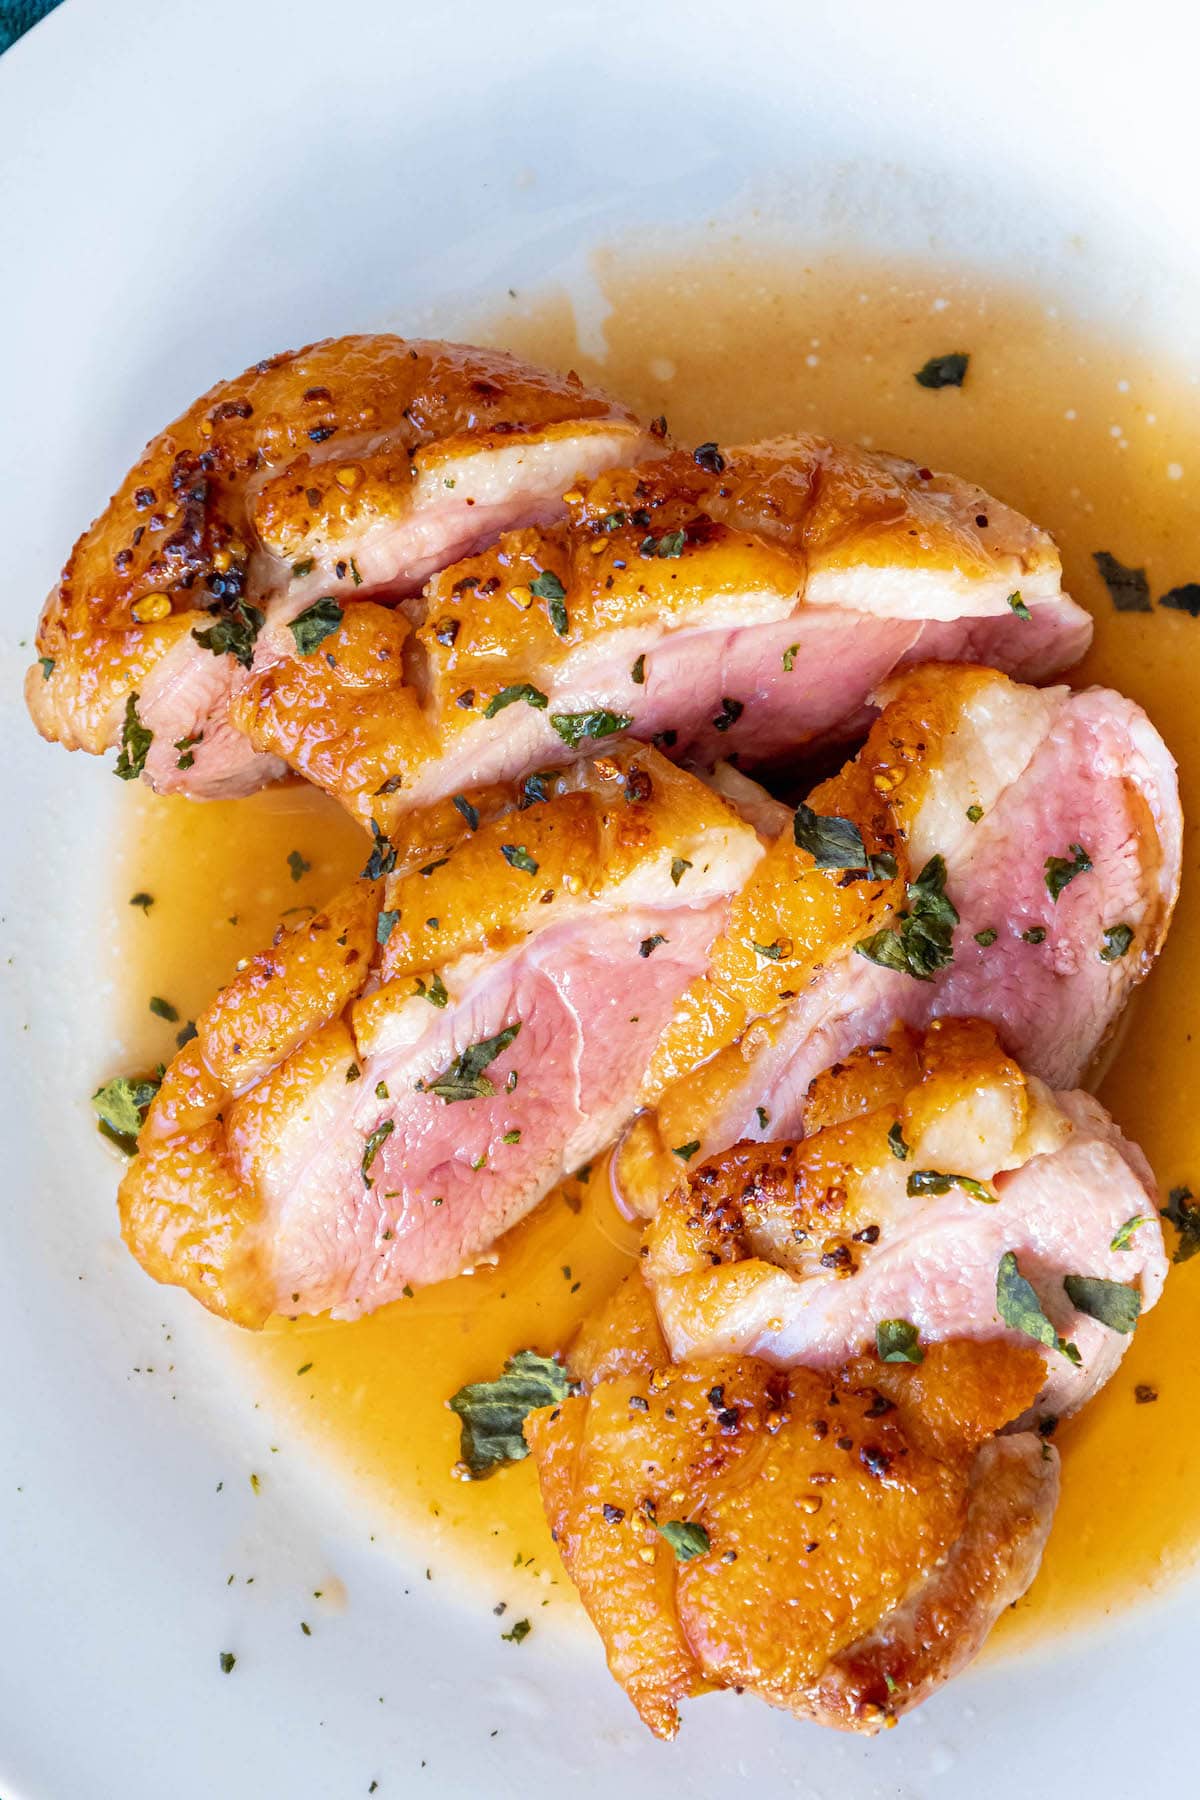 sliced duck breast with crispy fat seasoned with salt, pepper, and herbs topped with an orange sauce on a plate